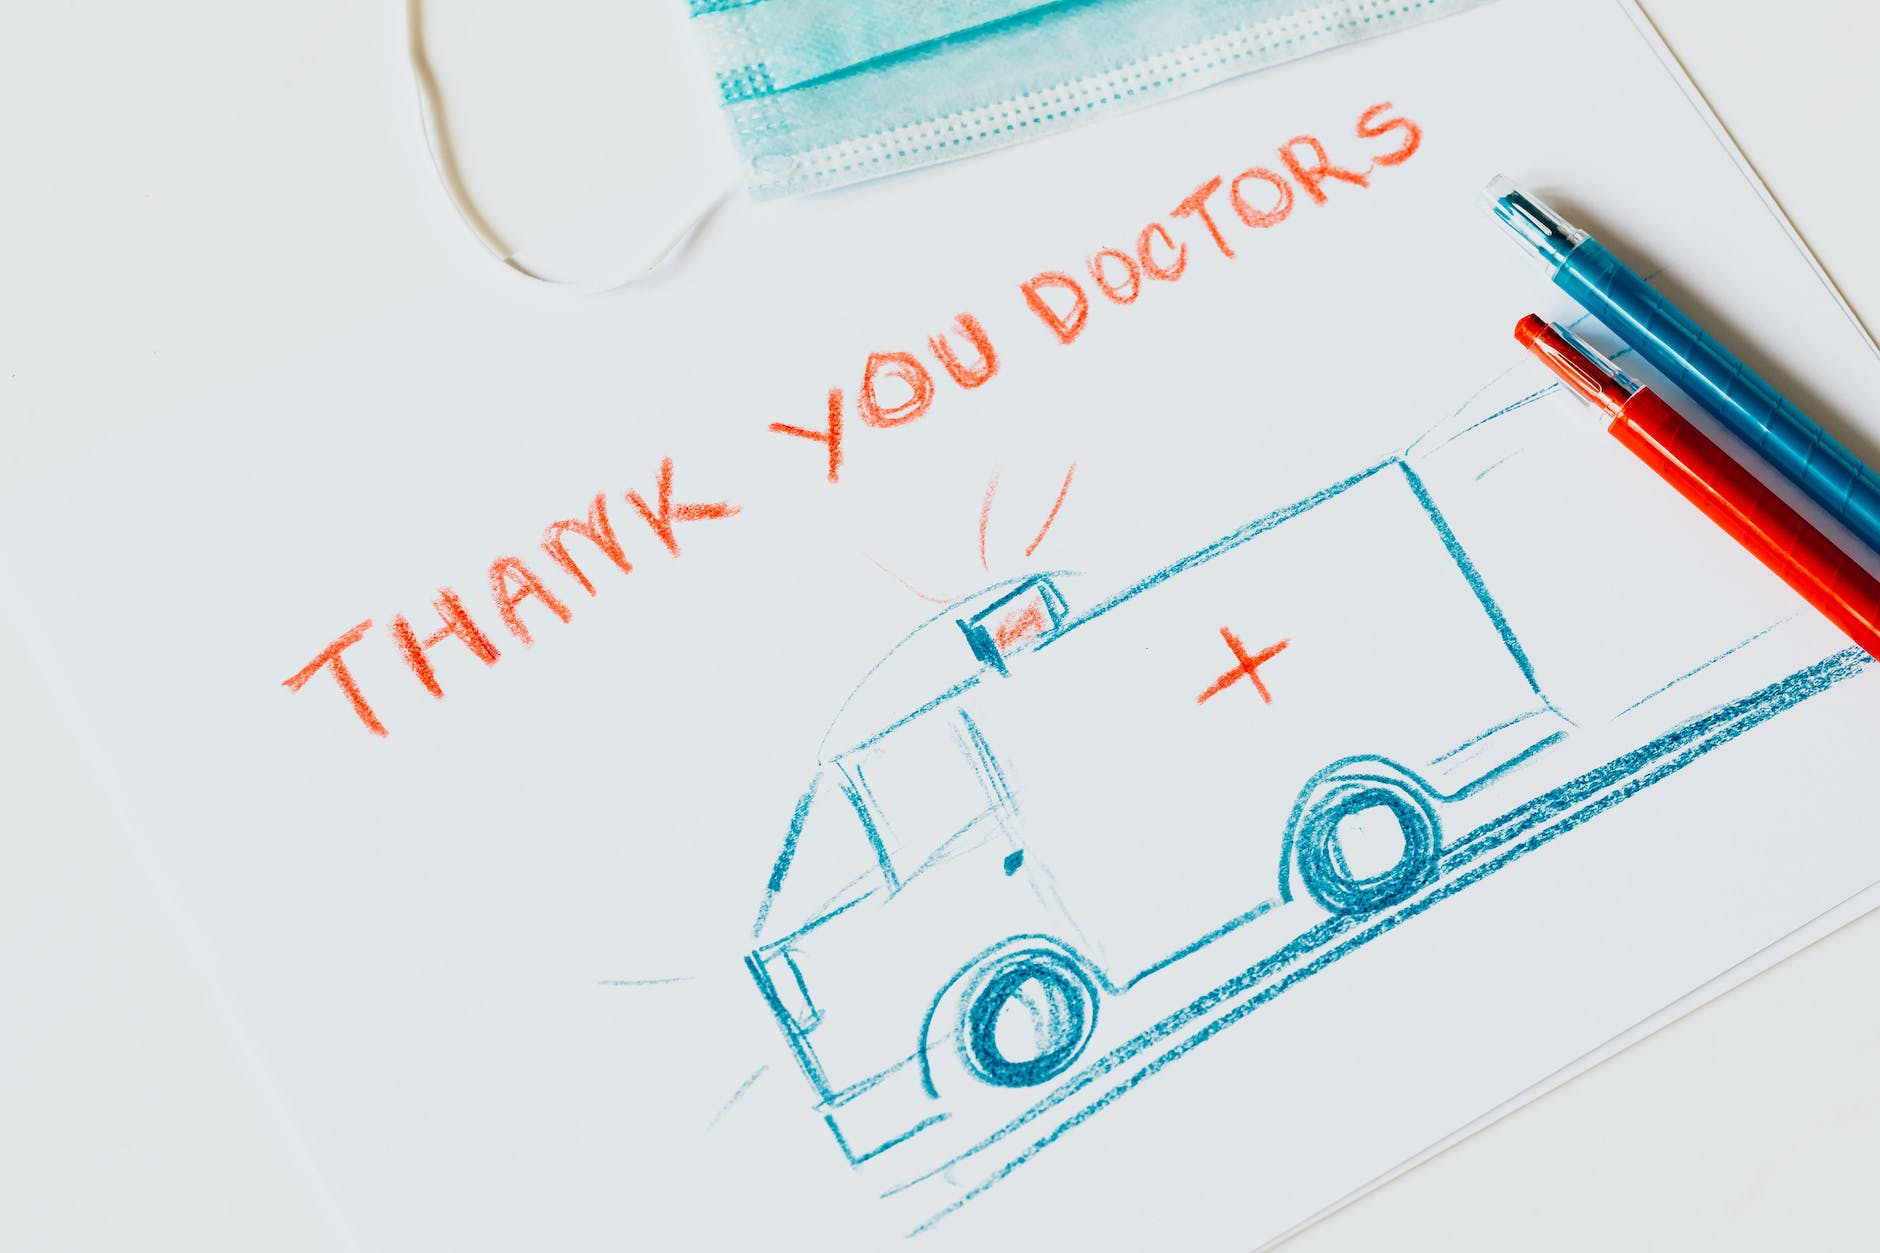 drawing of an ambulance with the text thank you doctors